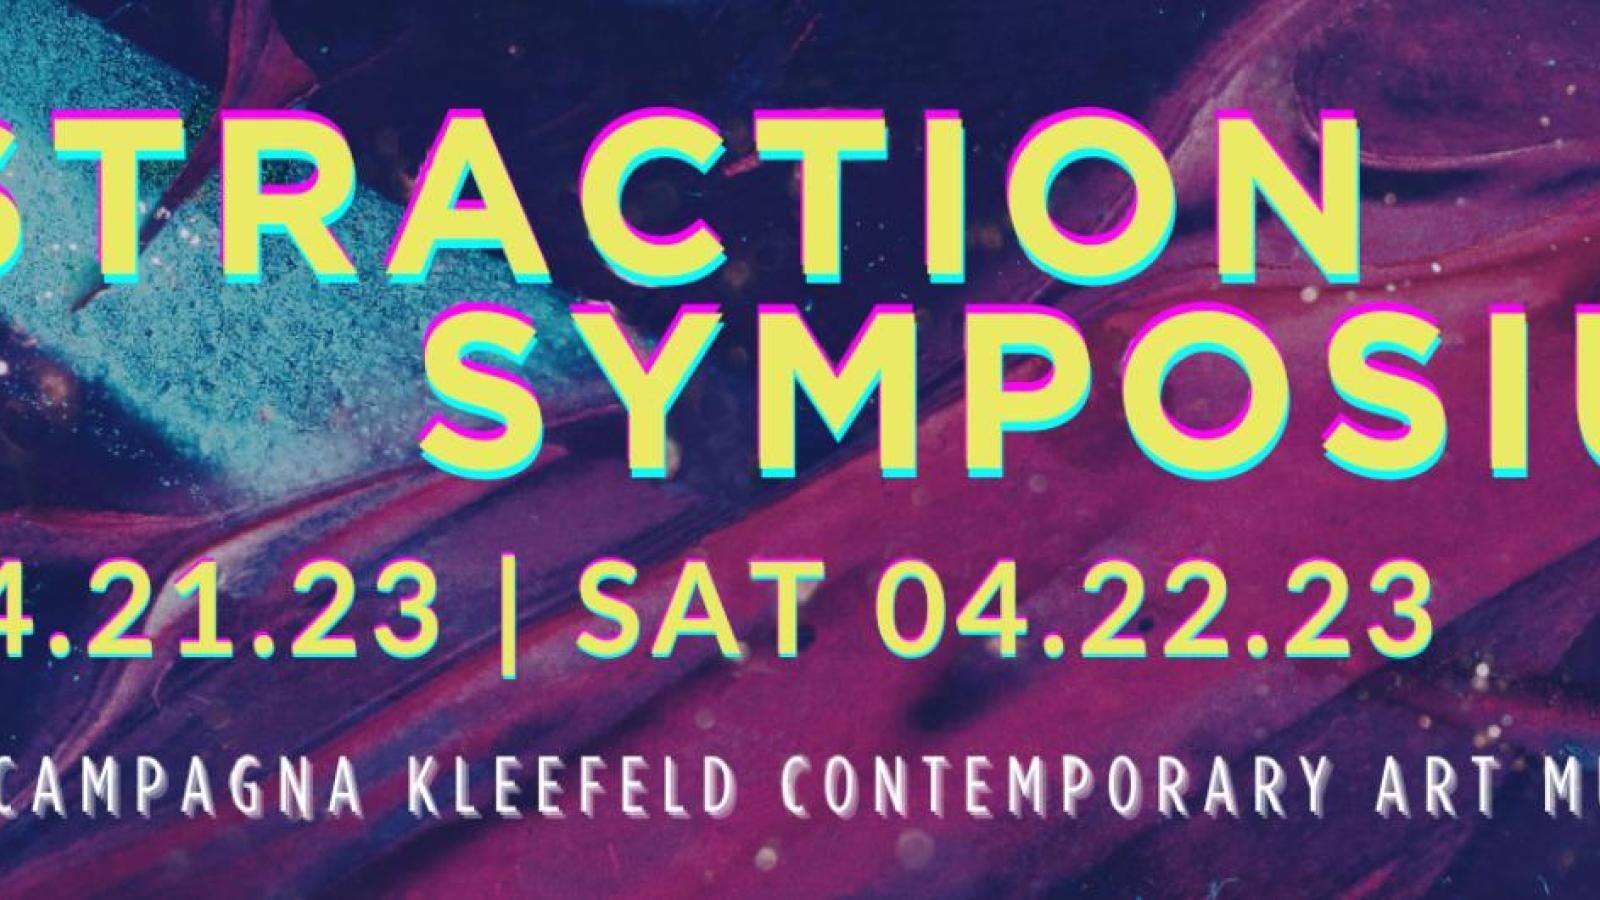 Abstraction Symposium April 21-22, 2023 at The Museum